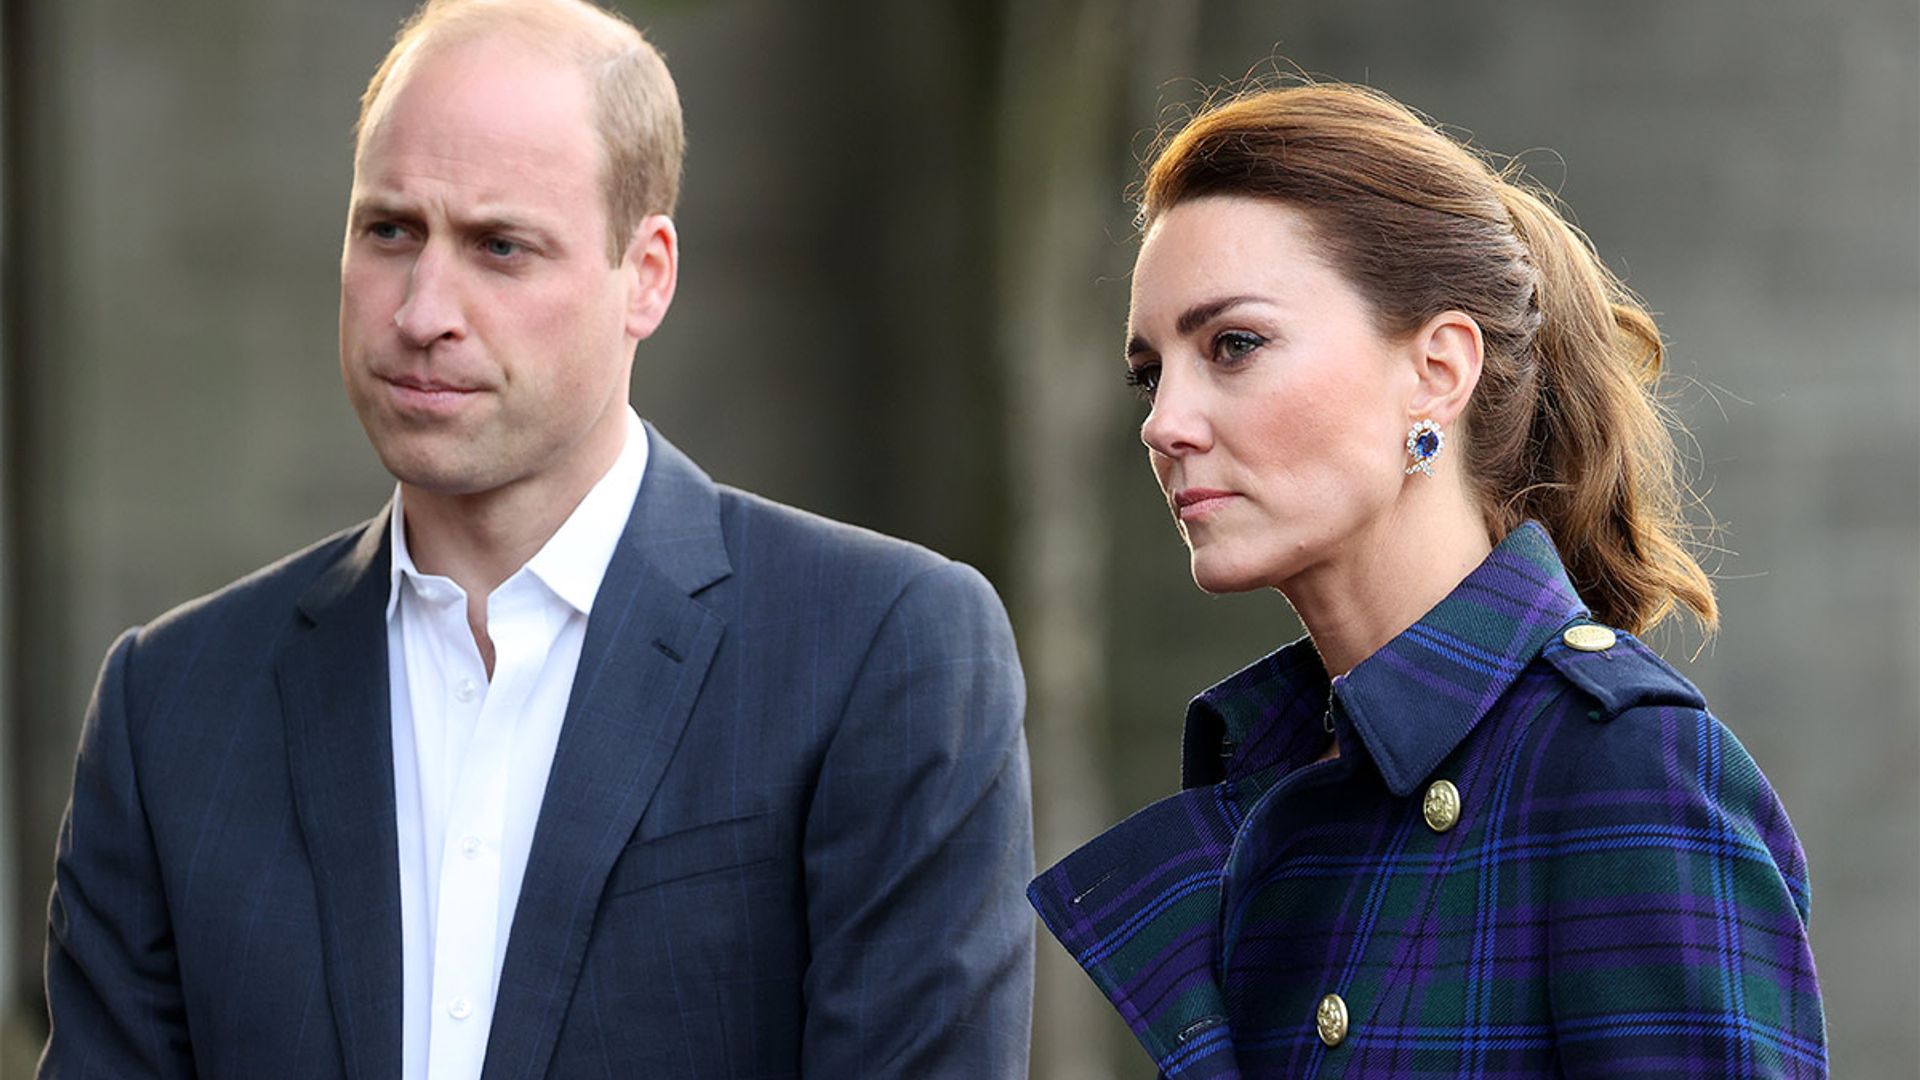 Prince William and Kate to make poignant appearance this week